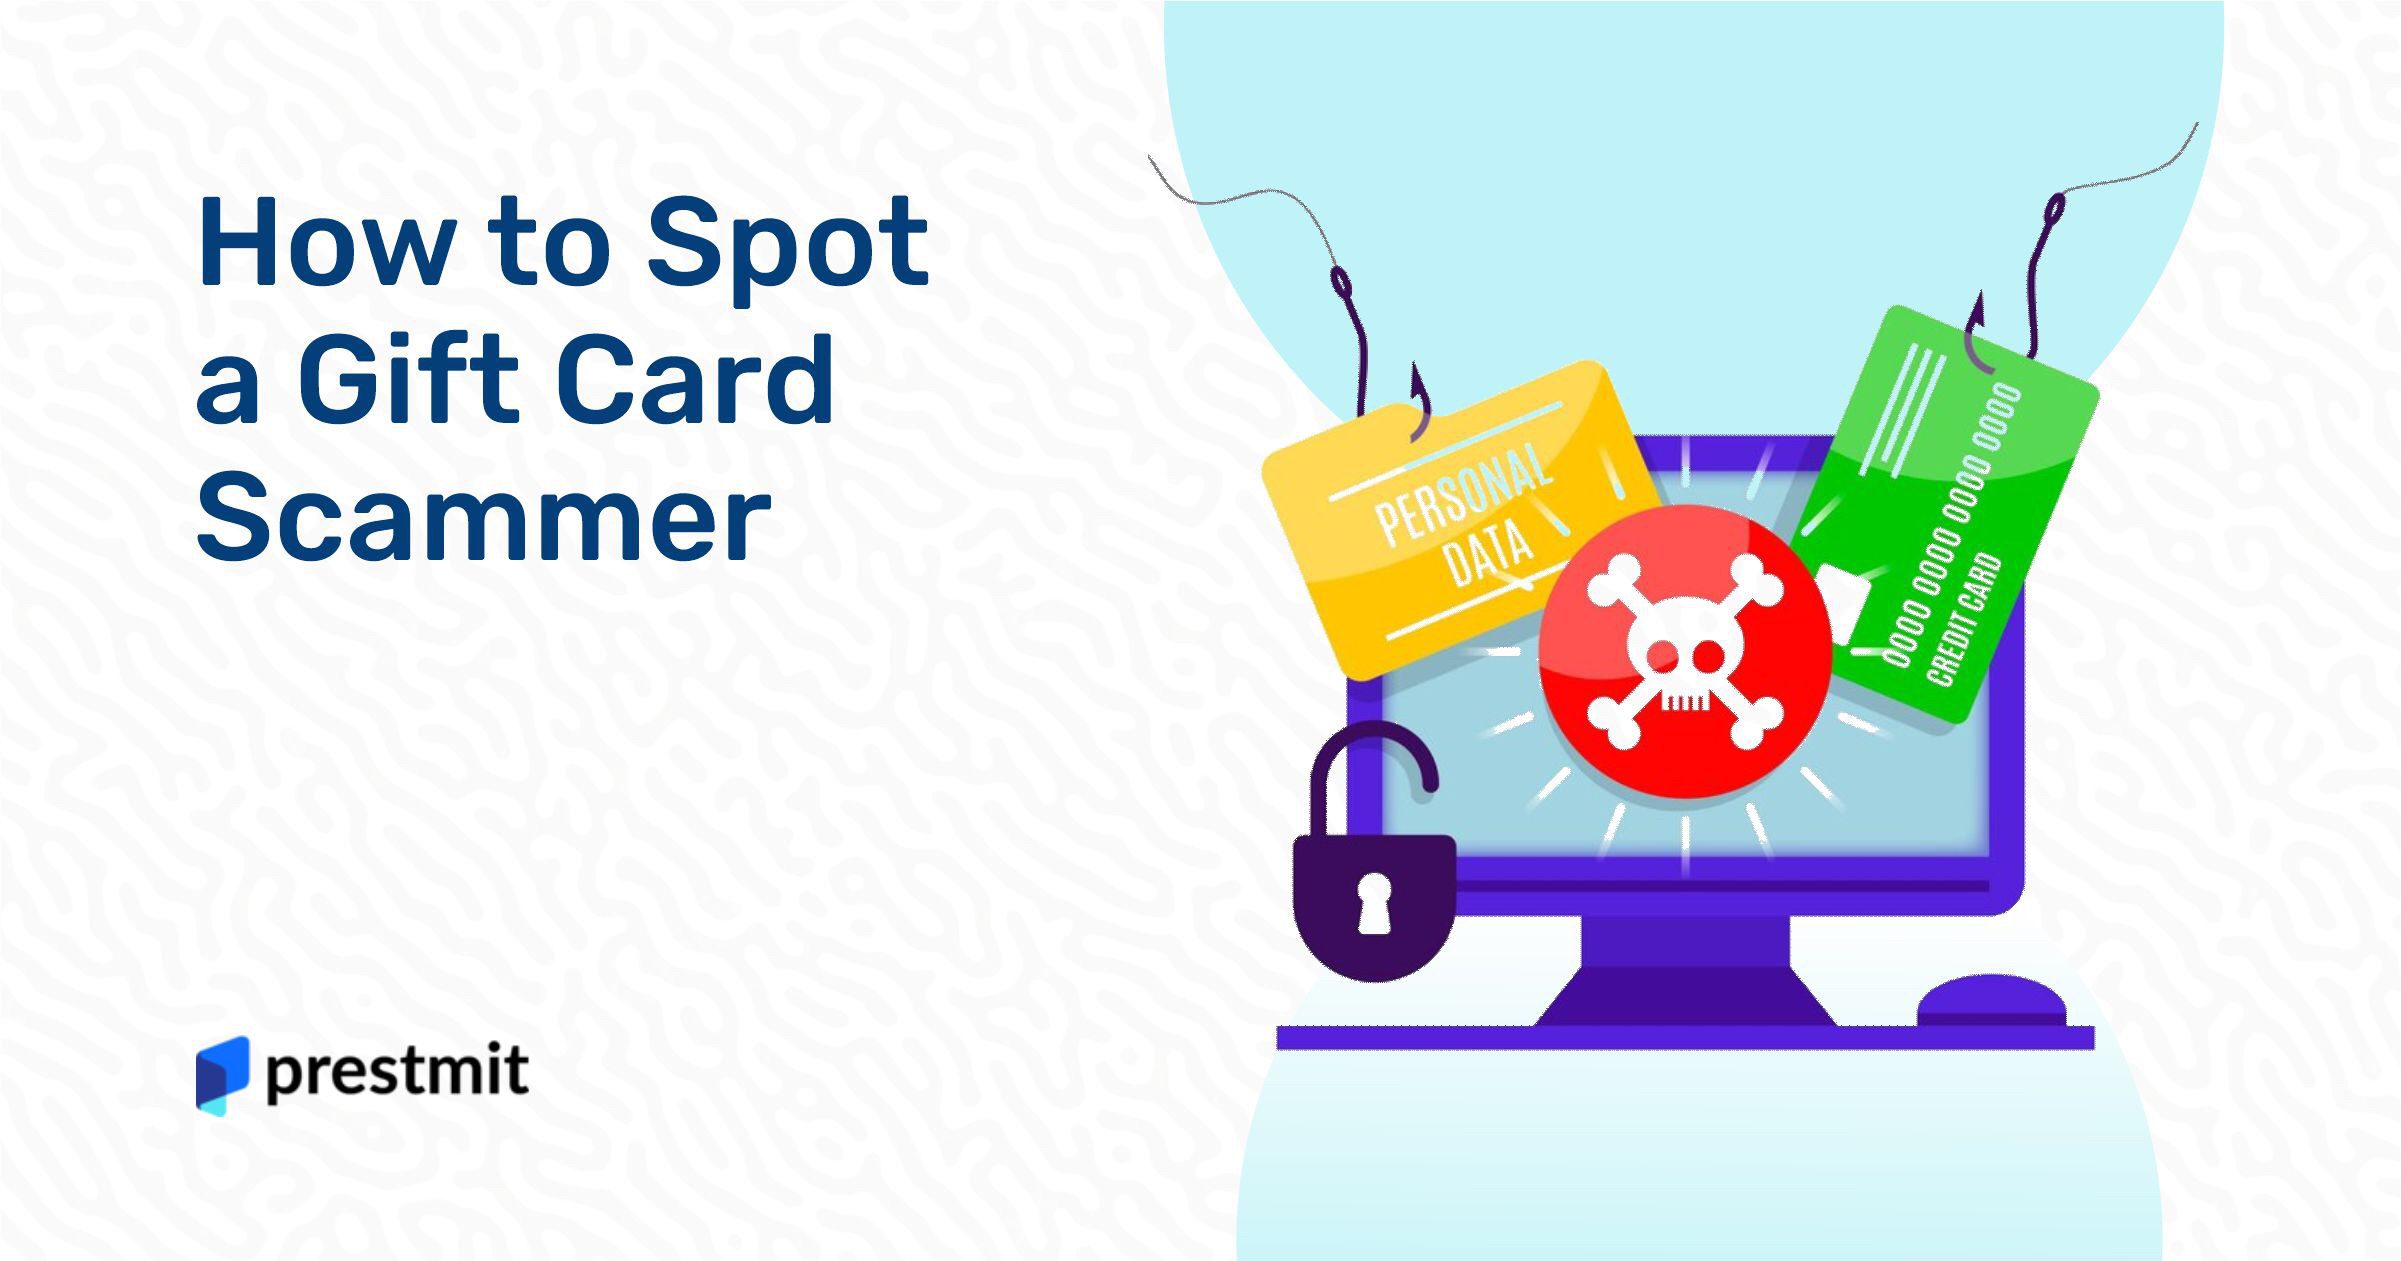 Gift card scam targets in-store racks, how to protect yourself